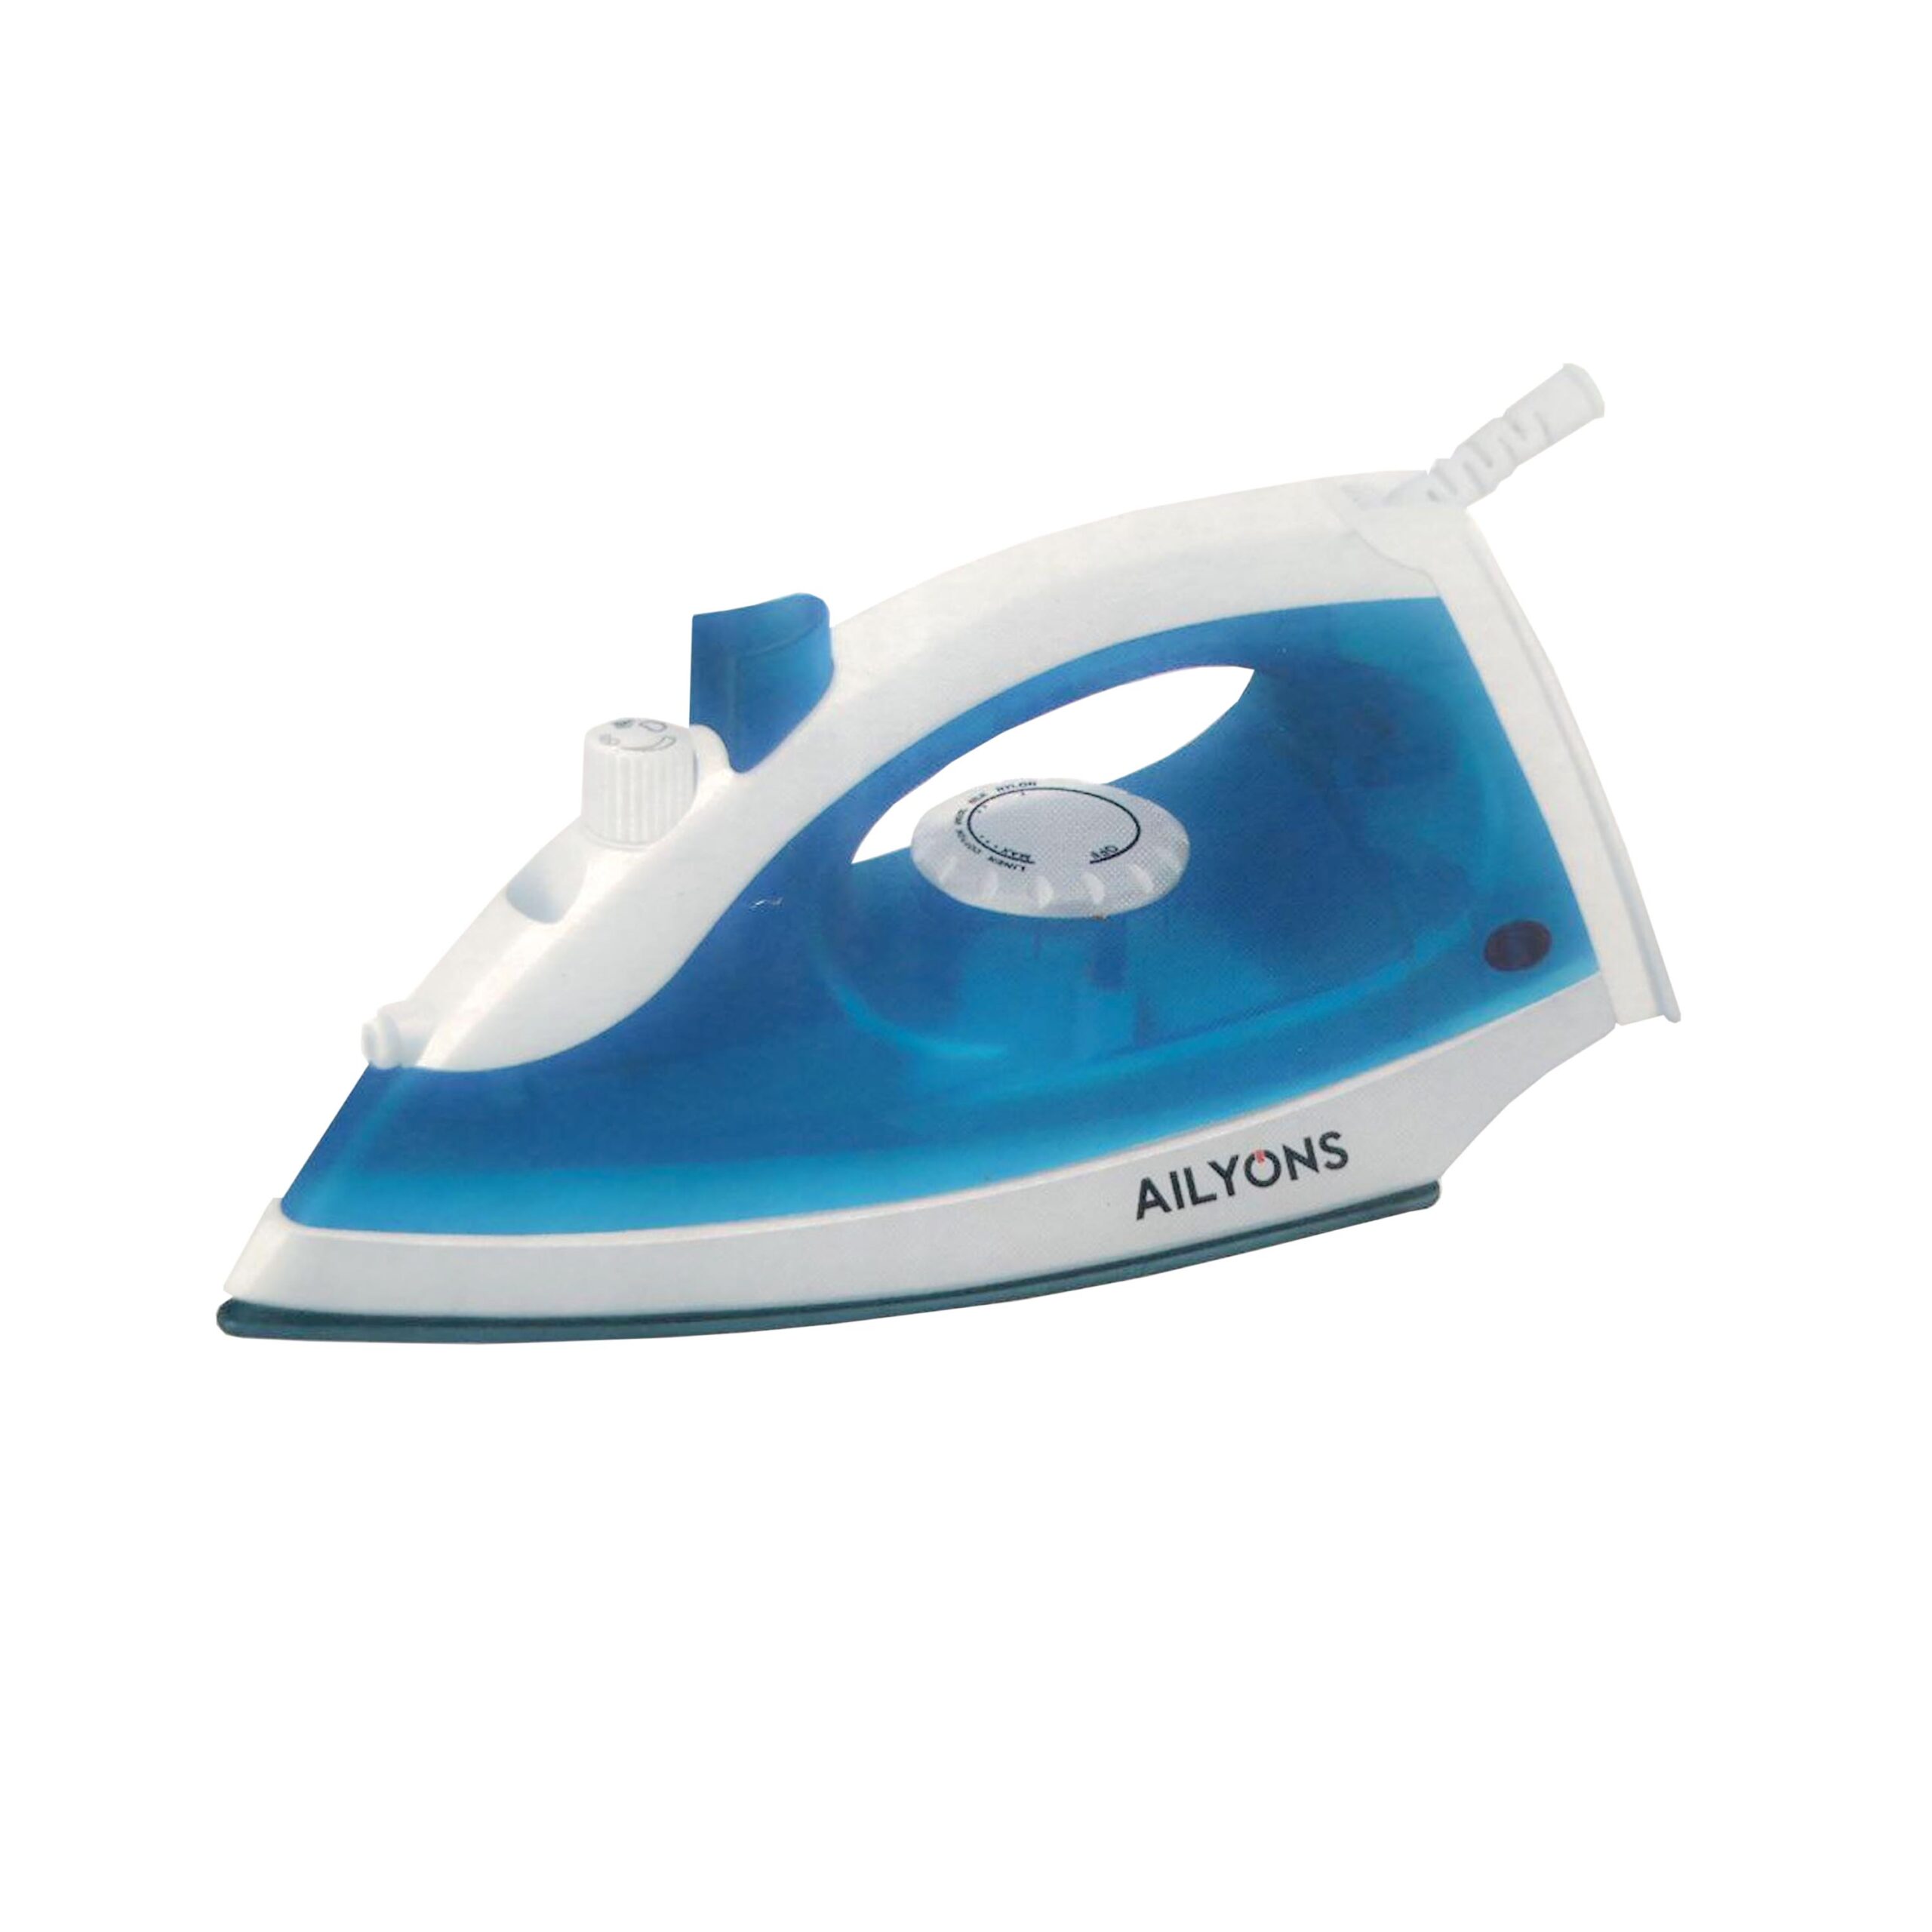 AILYONS ELECTRIC
STEAM IRON